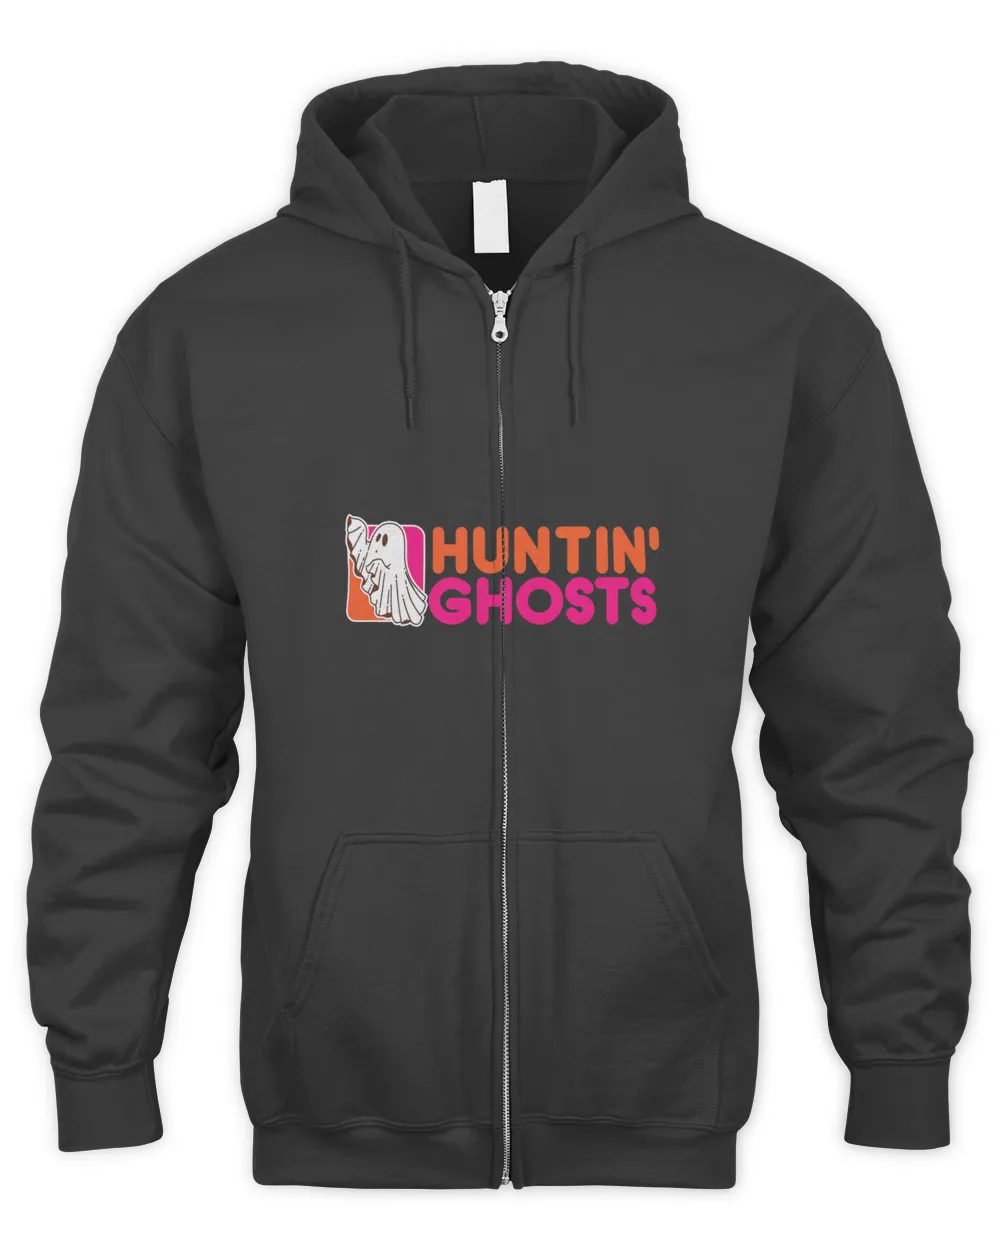 Hunting Ghosts Ghost Hunter Paranormal Activity Halloween